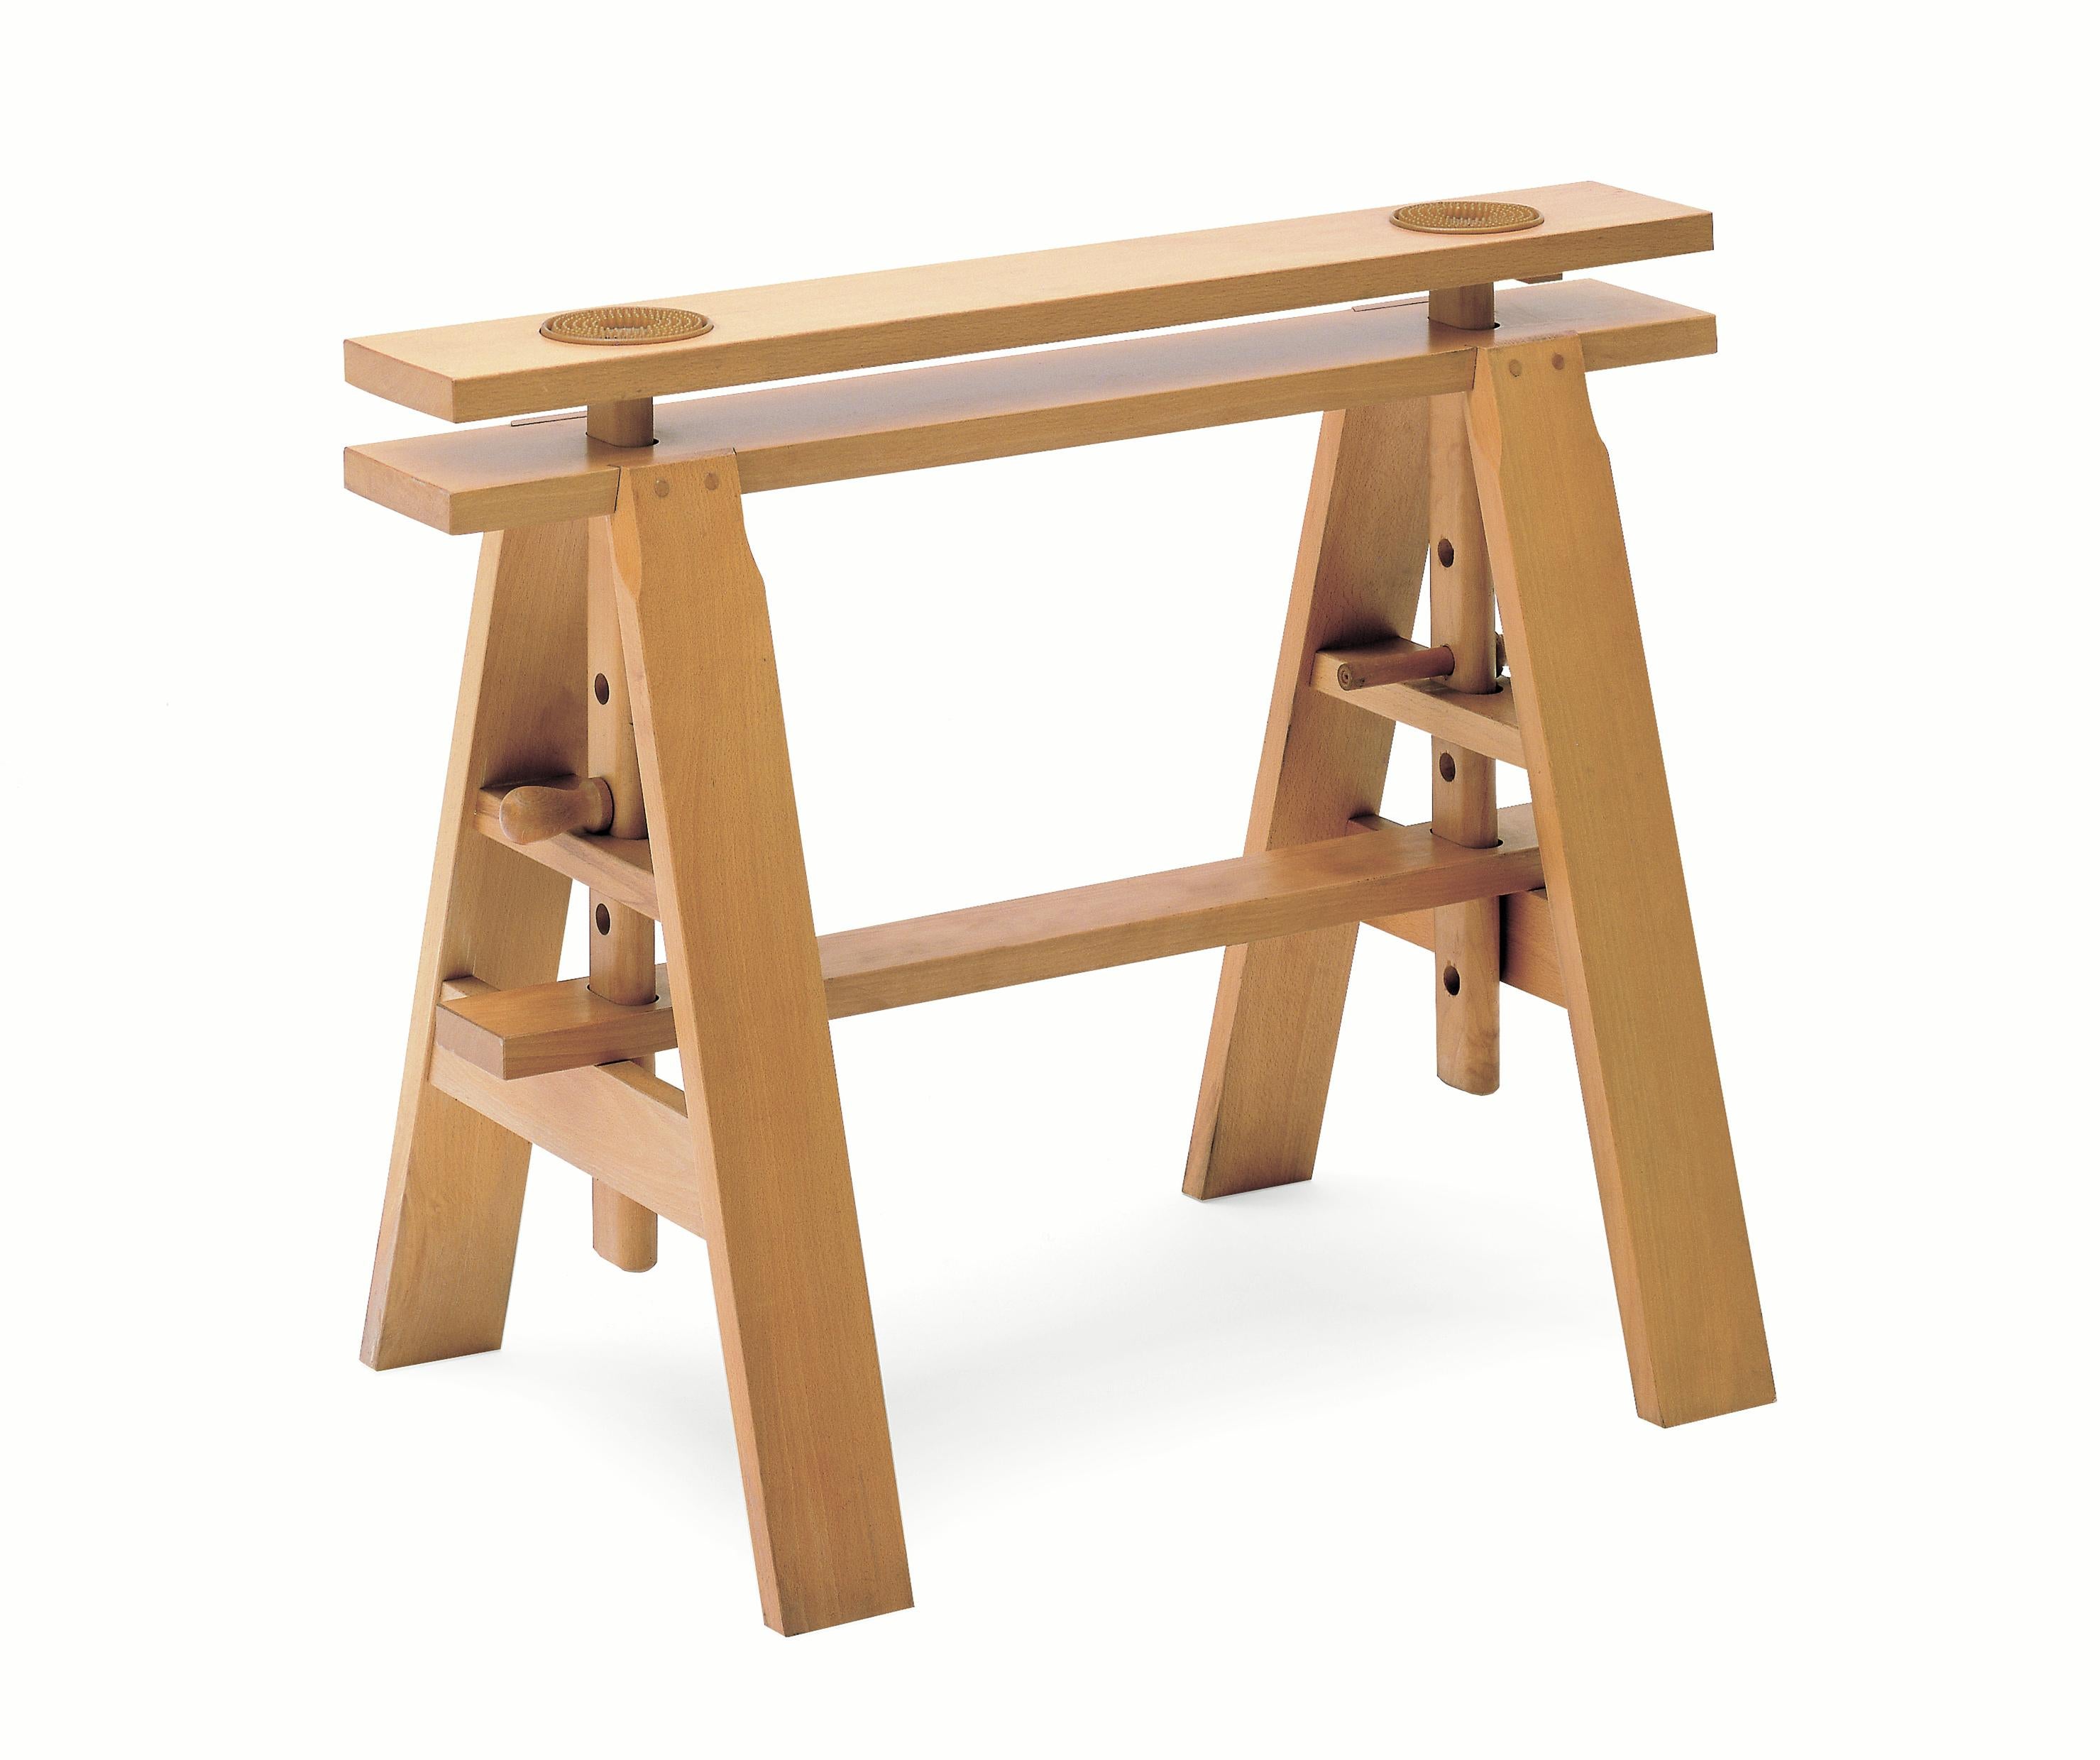 Zanotta Leonardo Working Table in Laminate Top and Natural Varnished Beech Frame by Achille Castiglioni

Natural varnished steam-treated beech trestle. 1” thick , particleboard top coated with white plastic laminate, or 1/2” thick, tempered plate